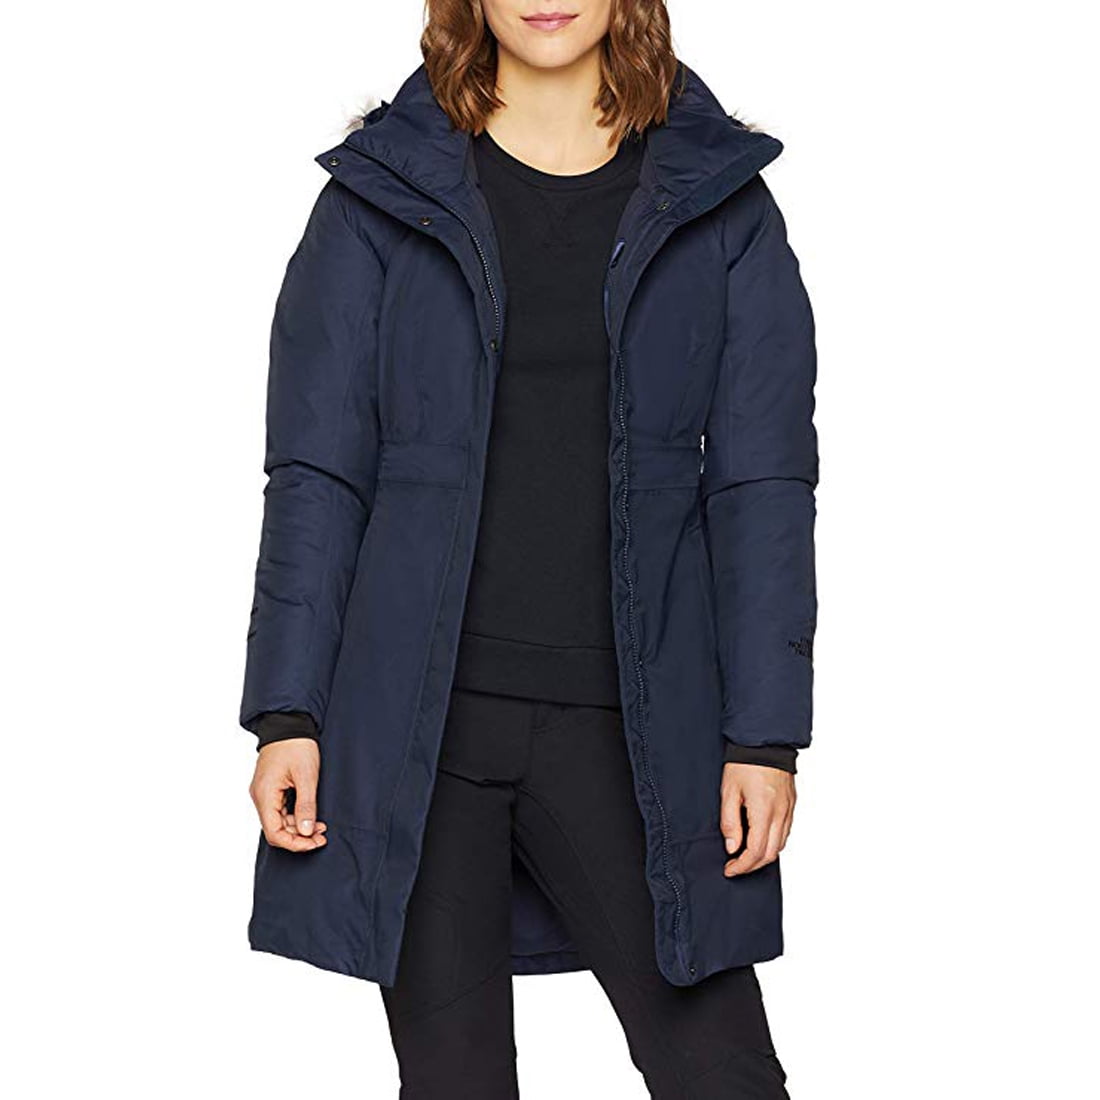 delicacy district ideology The North Face Women's Arctic Parka II, Urban Navy, Large - Walmart.com